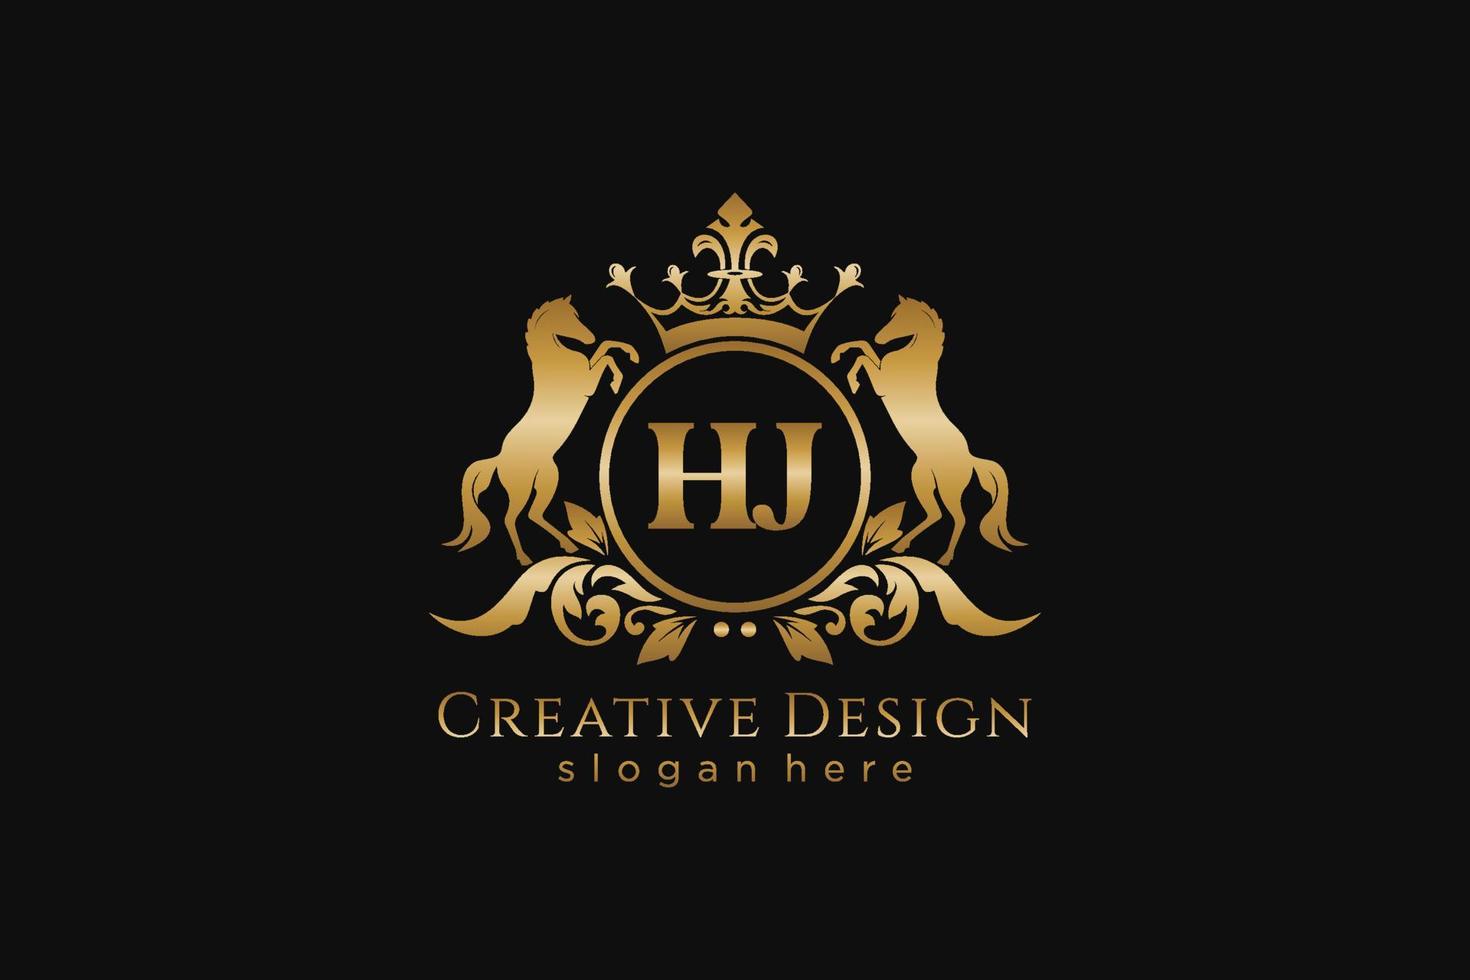 initial HJ Retro golden crest with circle and two horses, badge template with scrolls and royal crown - perfect for luxurious branding projects vector